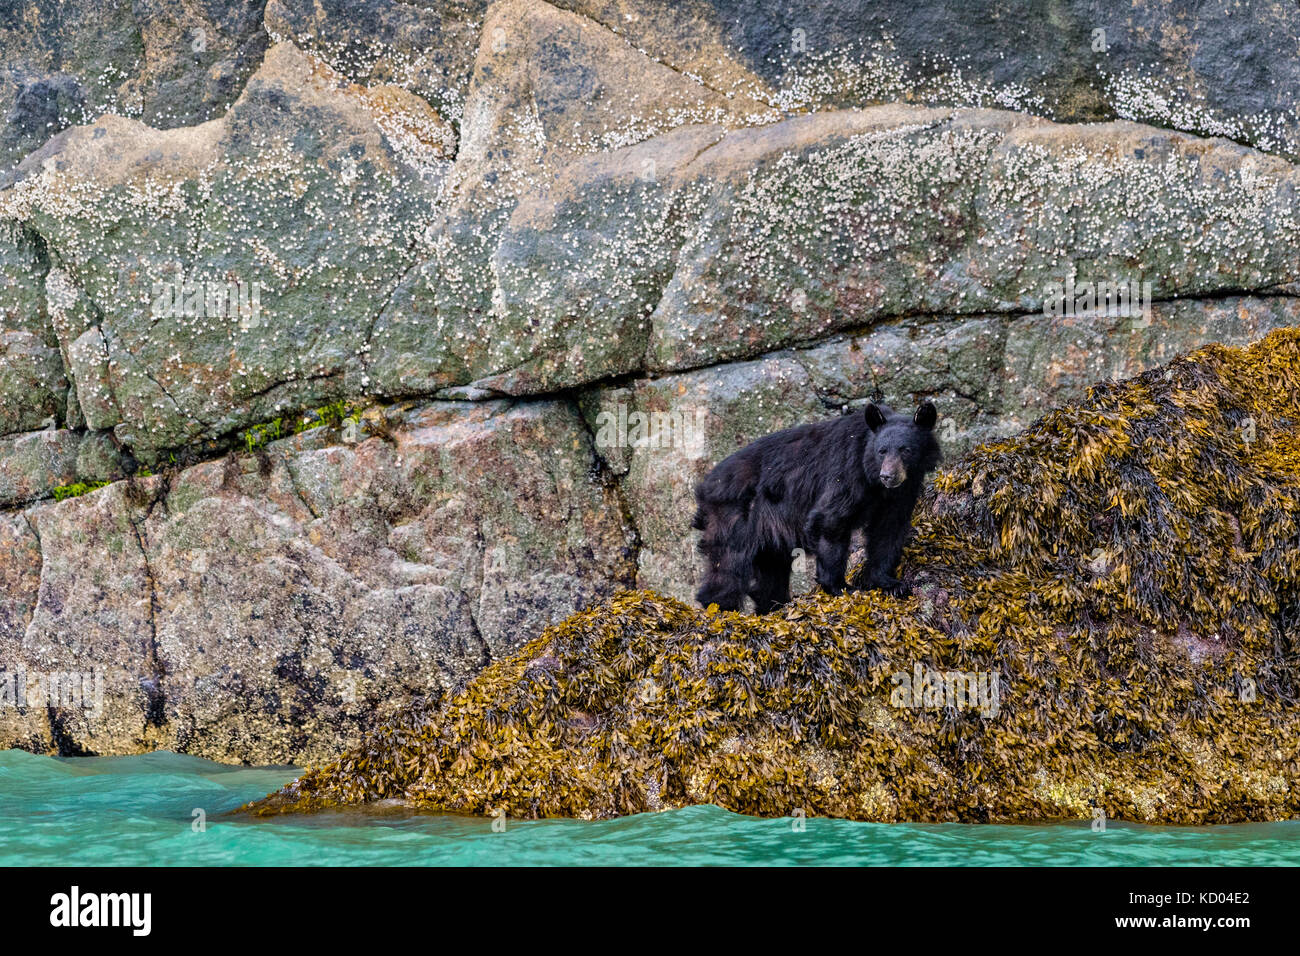 Black bear standing in seaweed near waterline at low tide along the steep cliffs in Knight Inlet, British Columbia, Canada Stock Photo